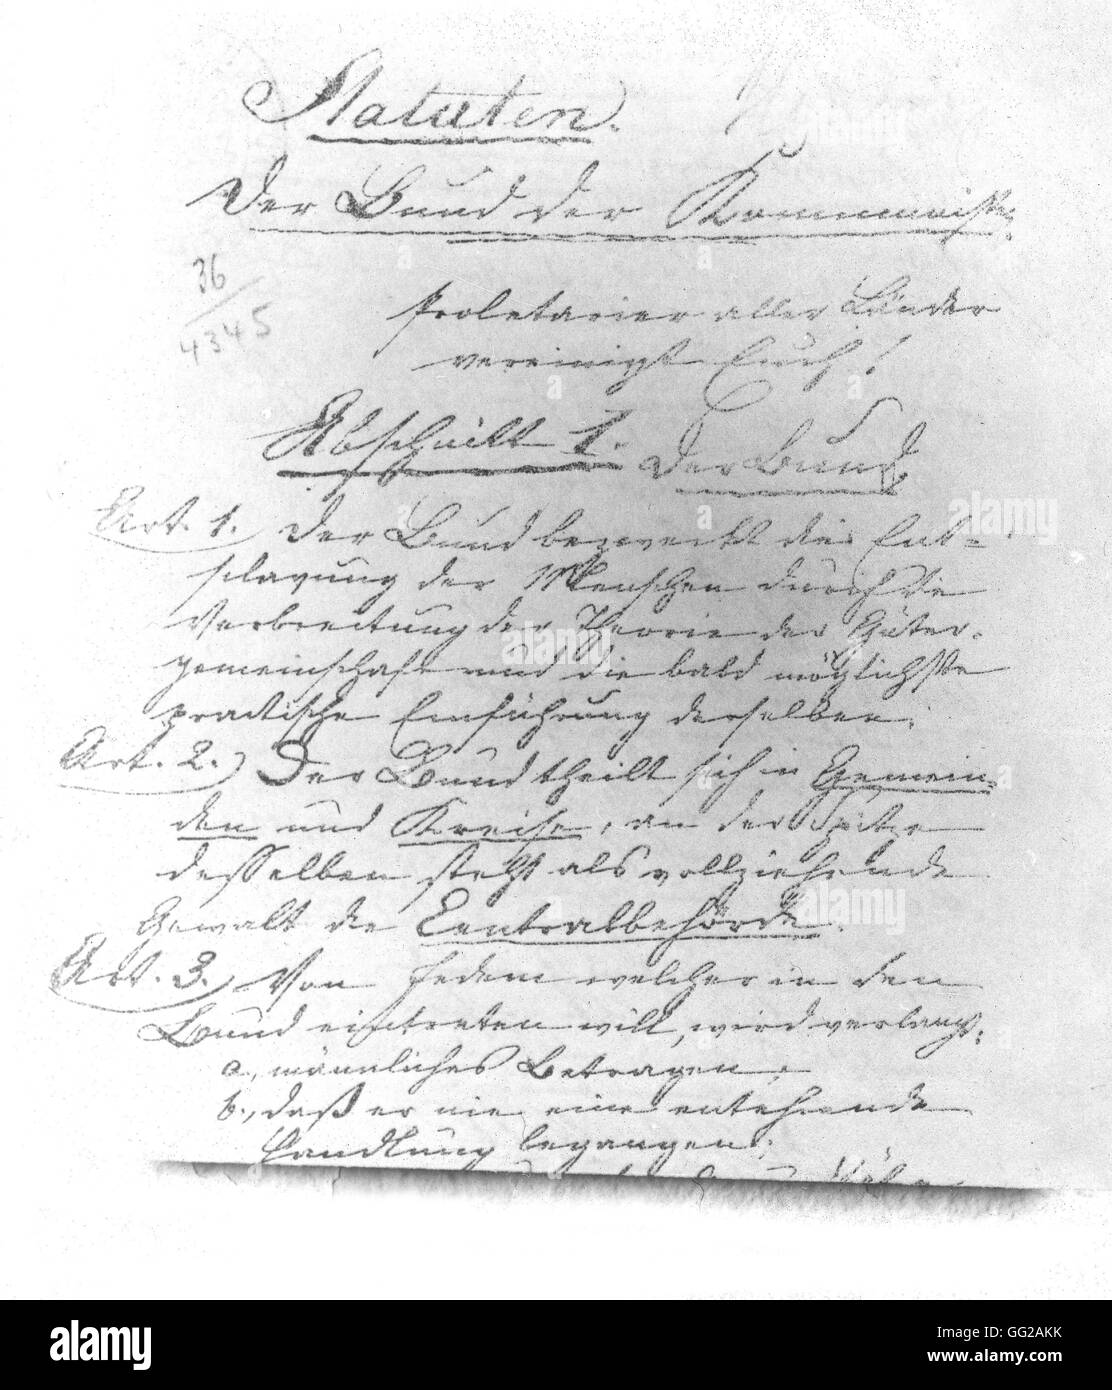 Project for statuses of the Communist league, written by Karl Marx 1847 Germany Karl Marx Haus Stock Photo